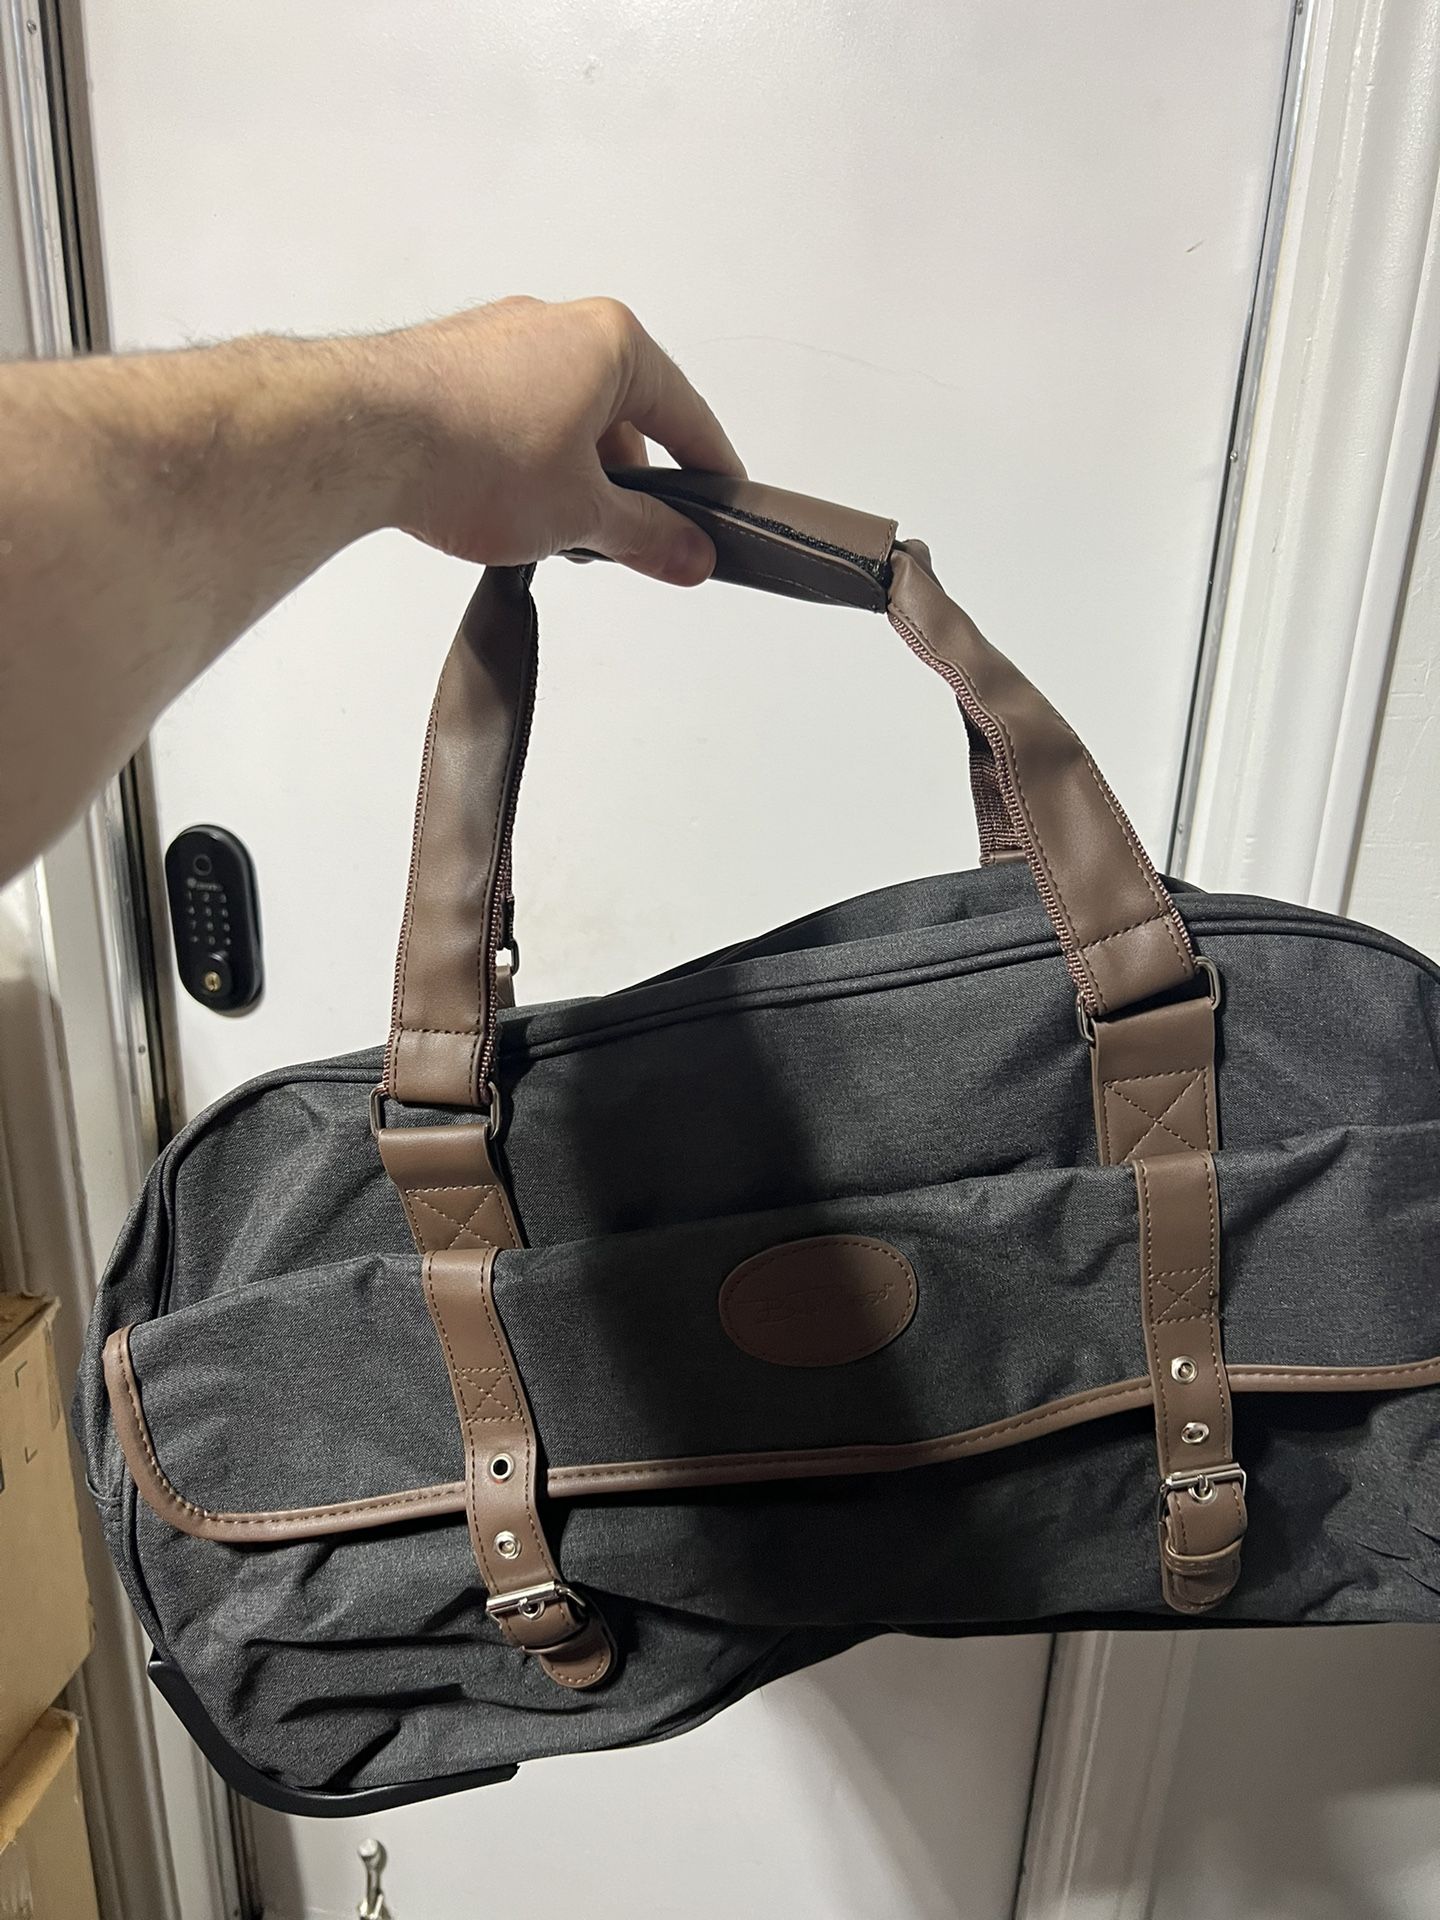 New Duffle Bag With Roller 